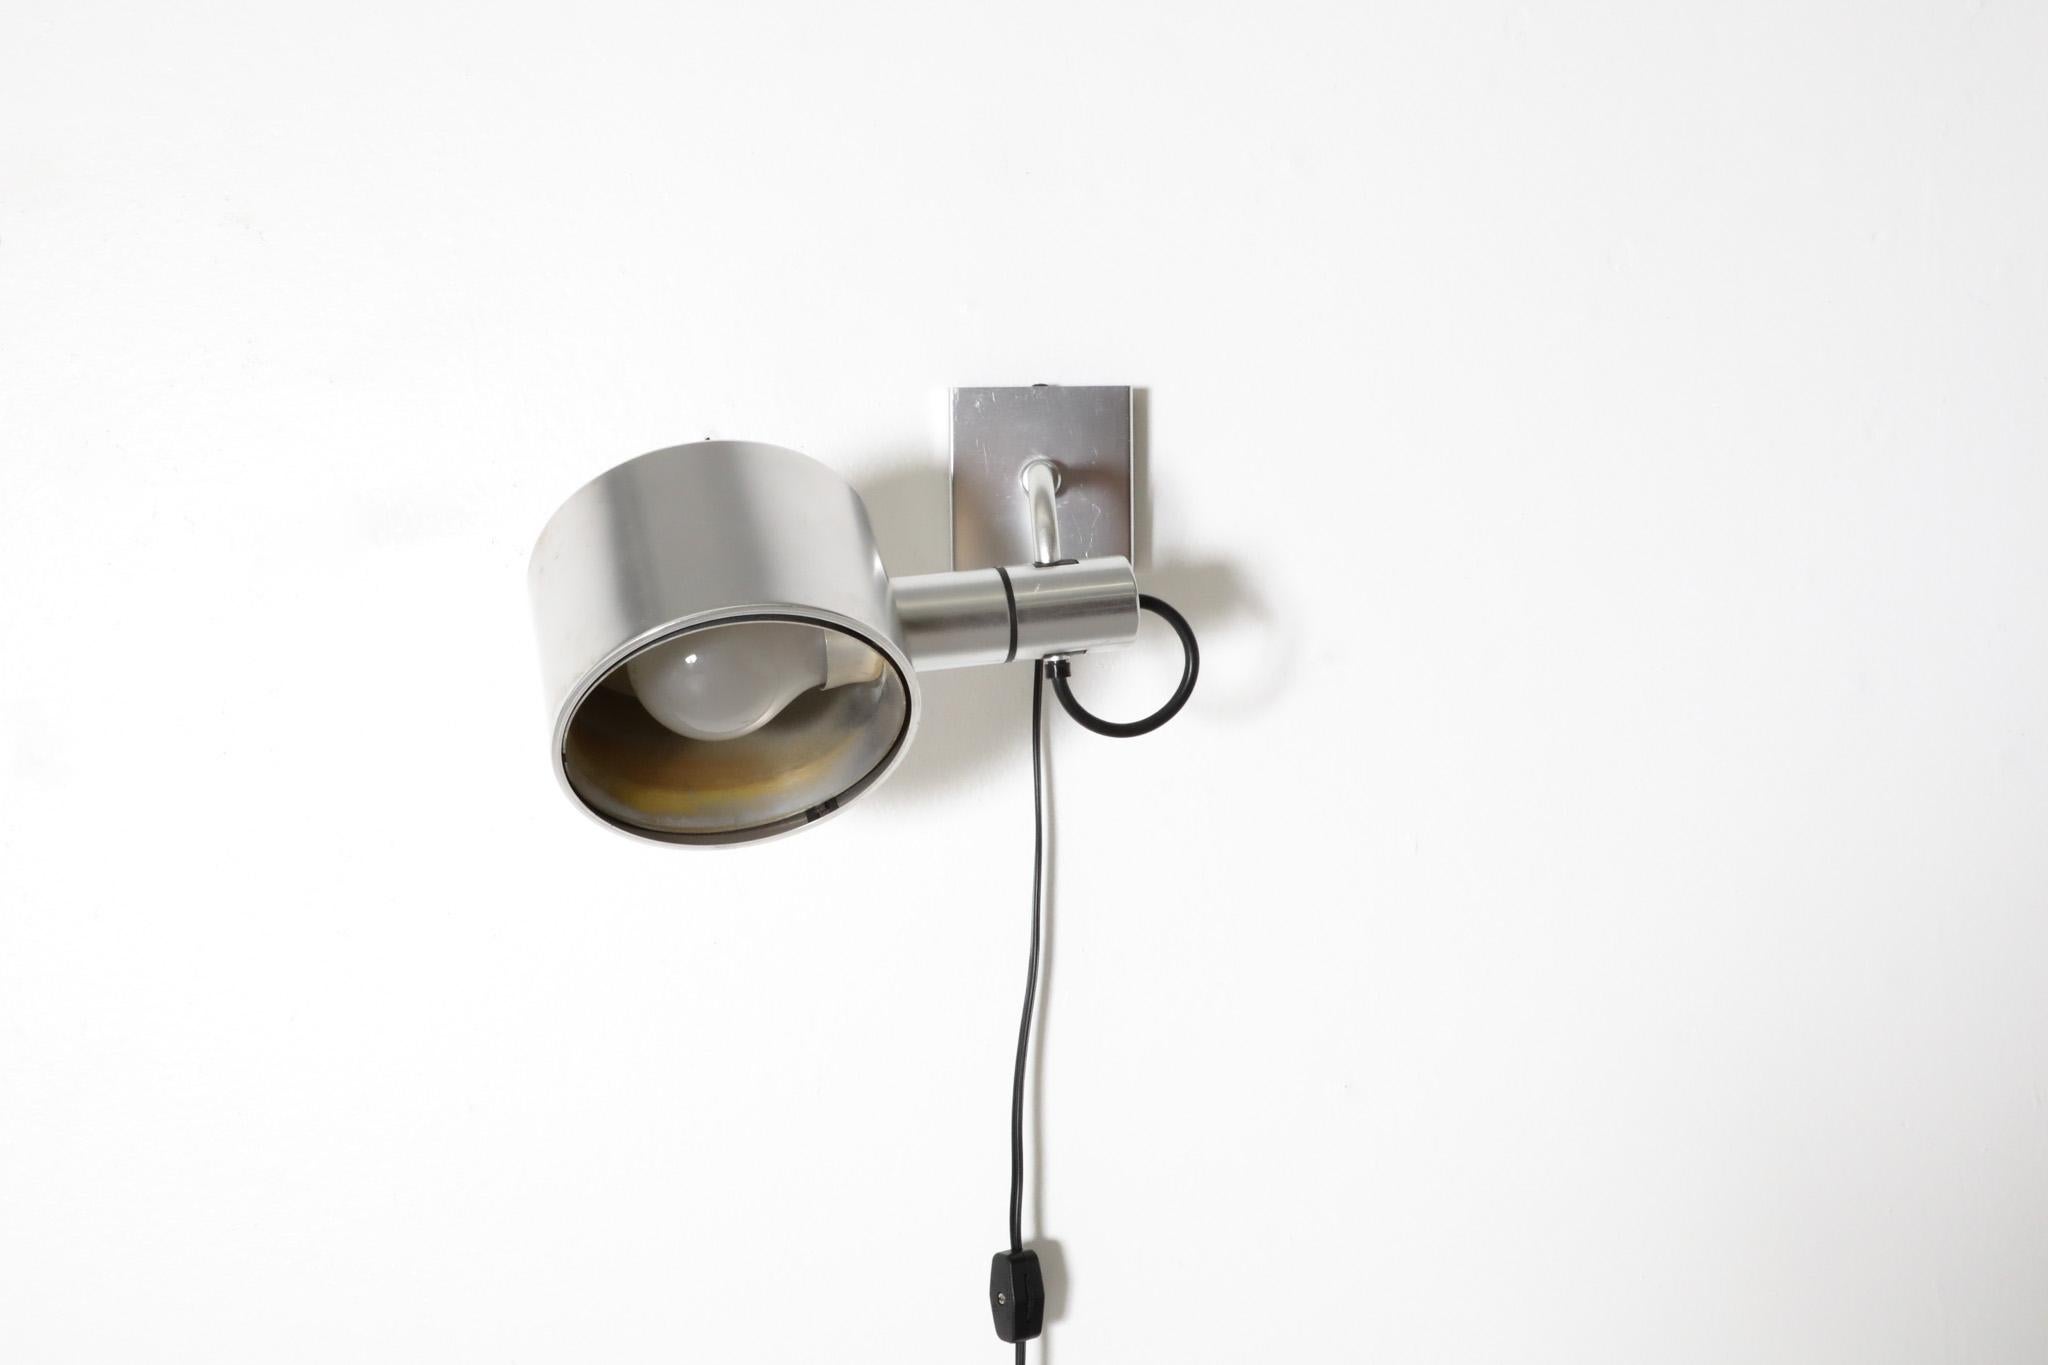 Mid-Century, aluminum wall mounted pill box spot light designed by British desgners Ronald Holmes & Peter Nelson for Conelight Limited sometime in the 1970's. The Conelight Limited company was founded after World War II in October 1946 and ended